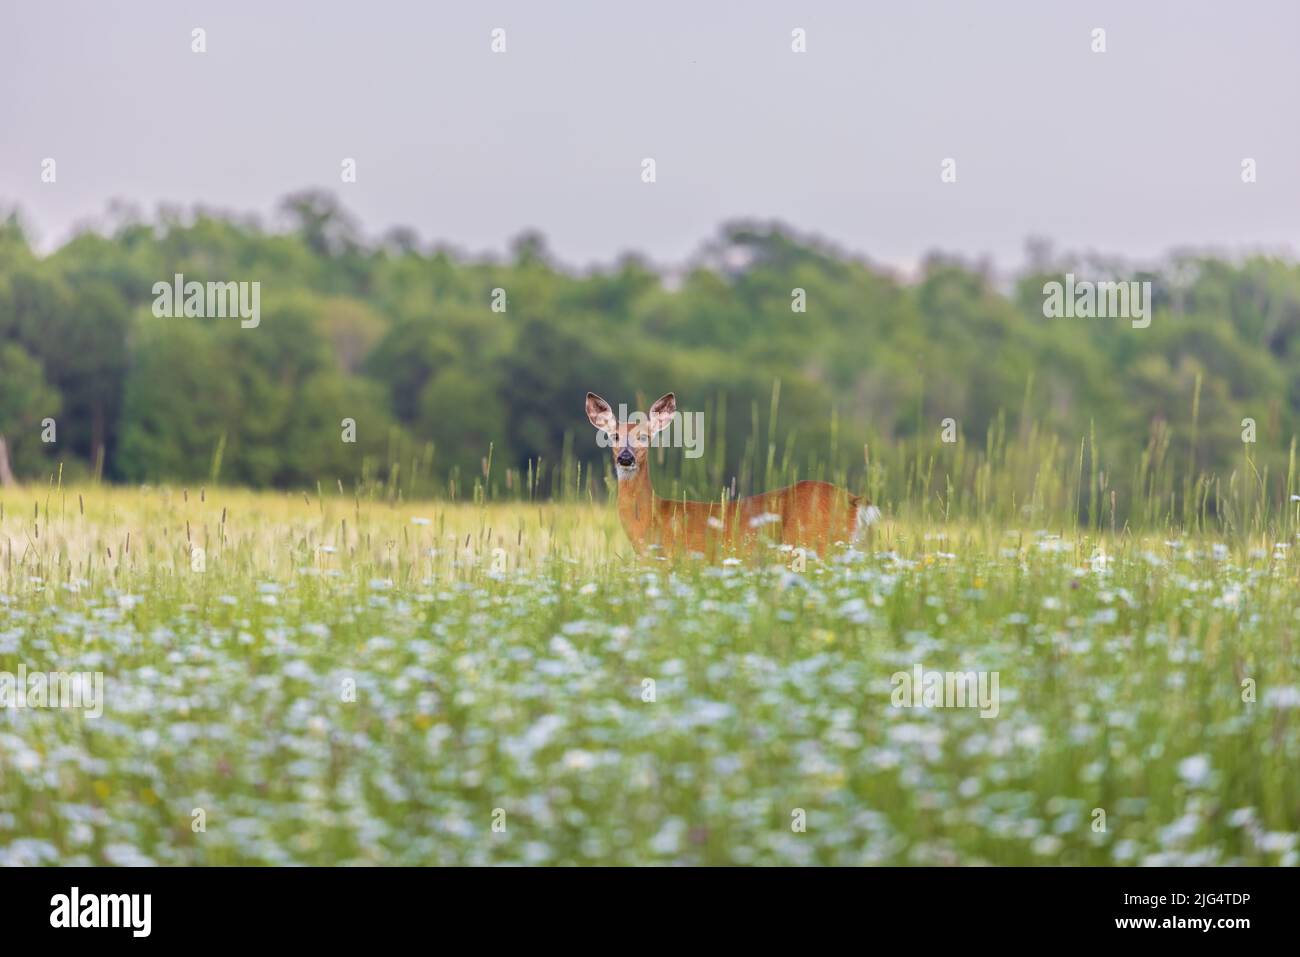 White-tailed doe standing in a field of daisies. Stock Photo